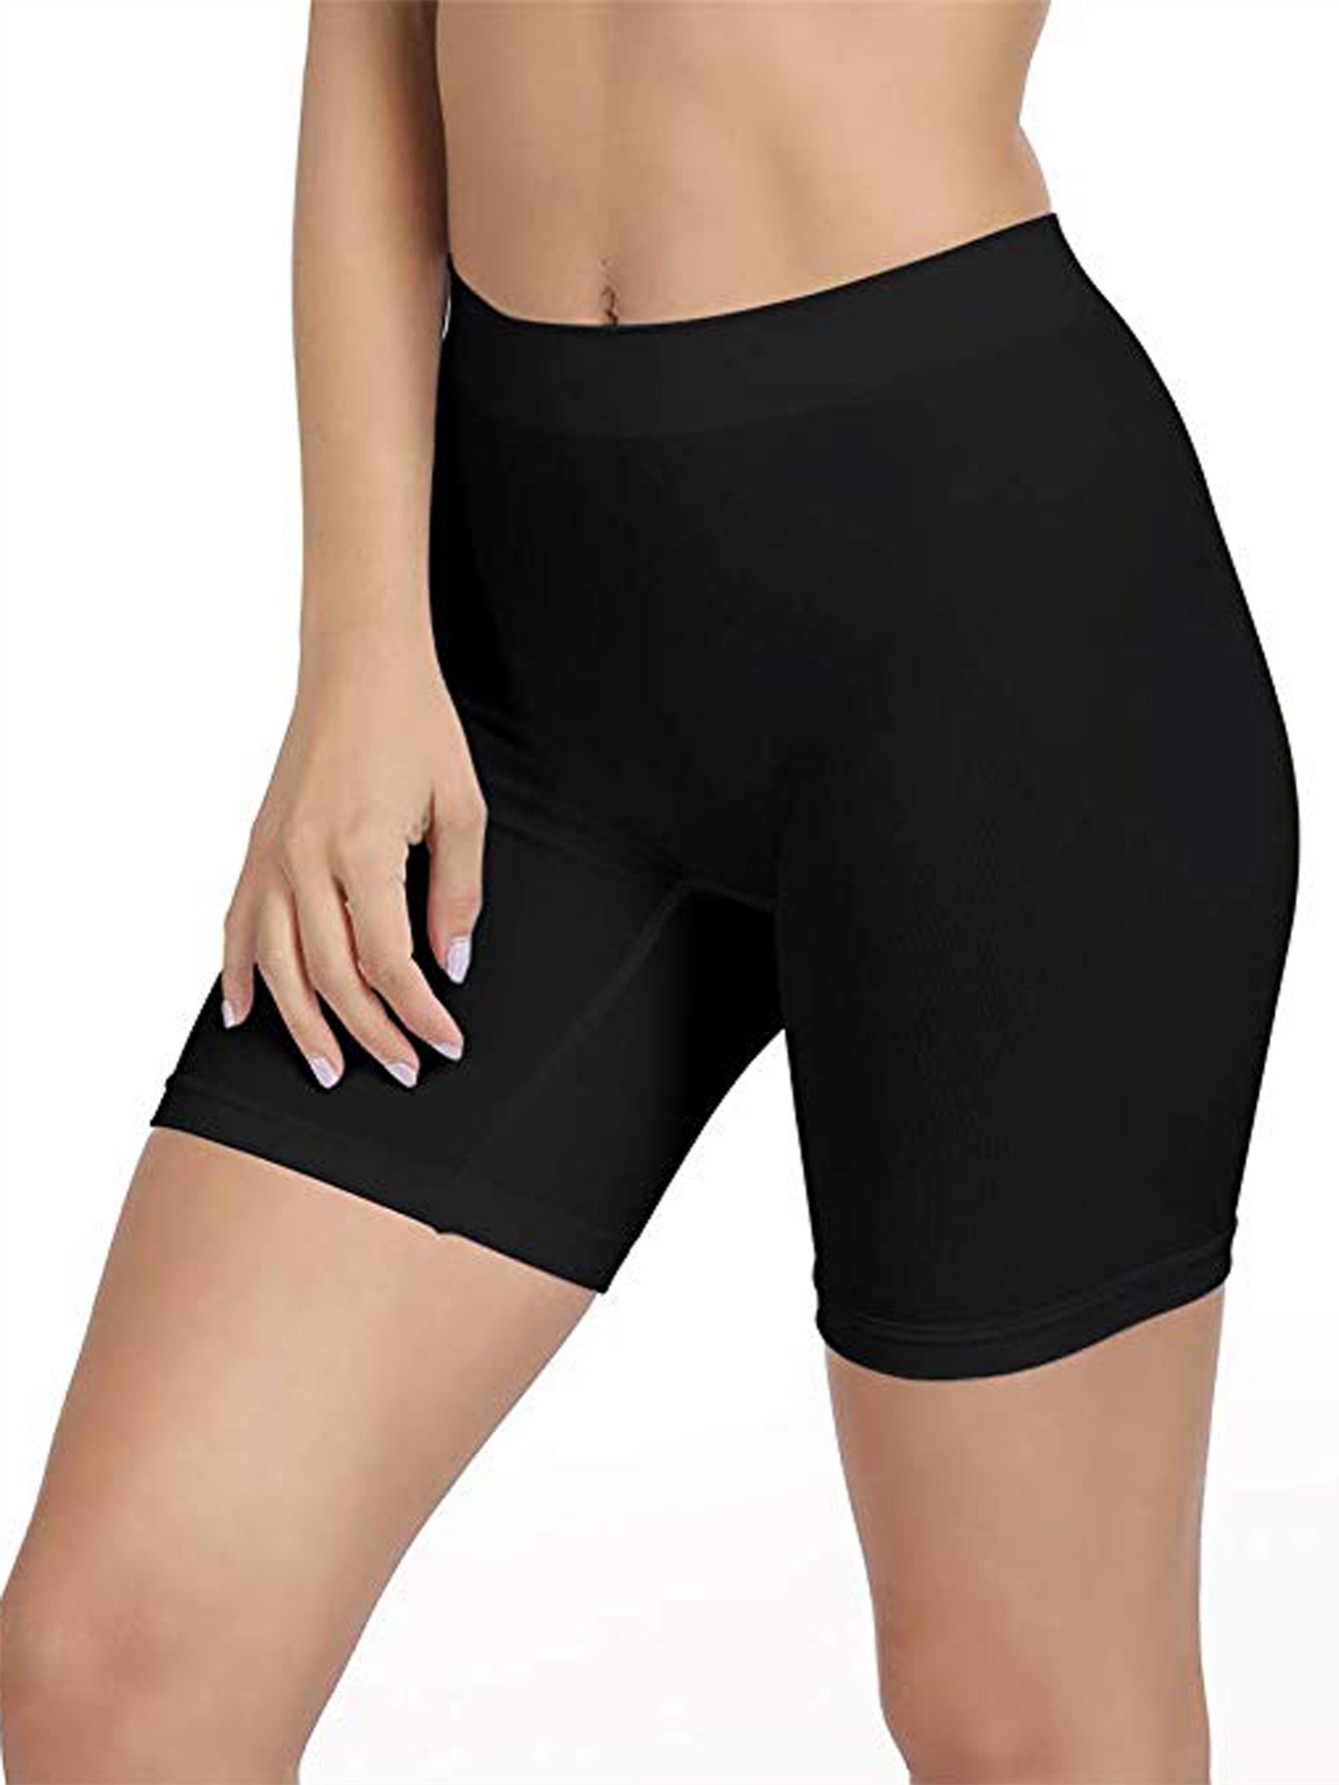 Women's Comfortable Seamless Smooth Slip Shorts for Under Dresses